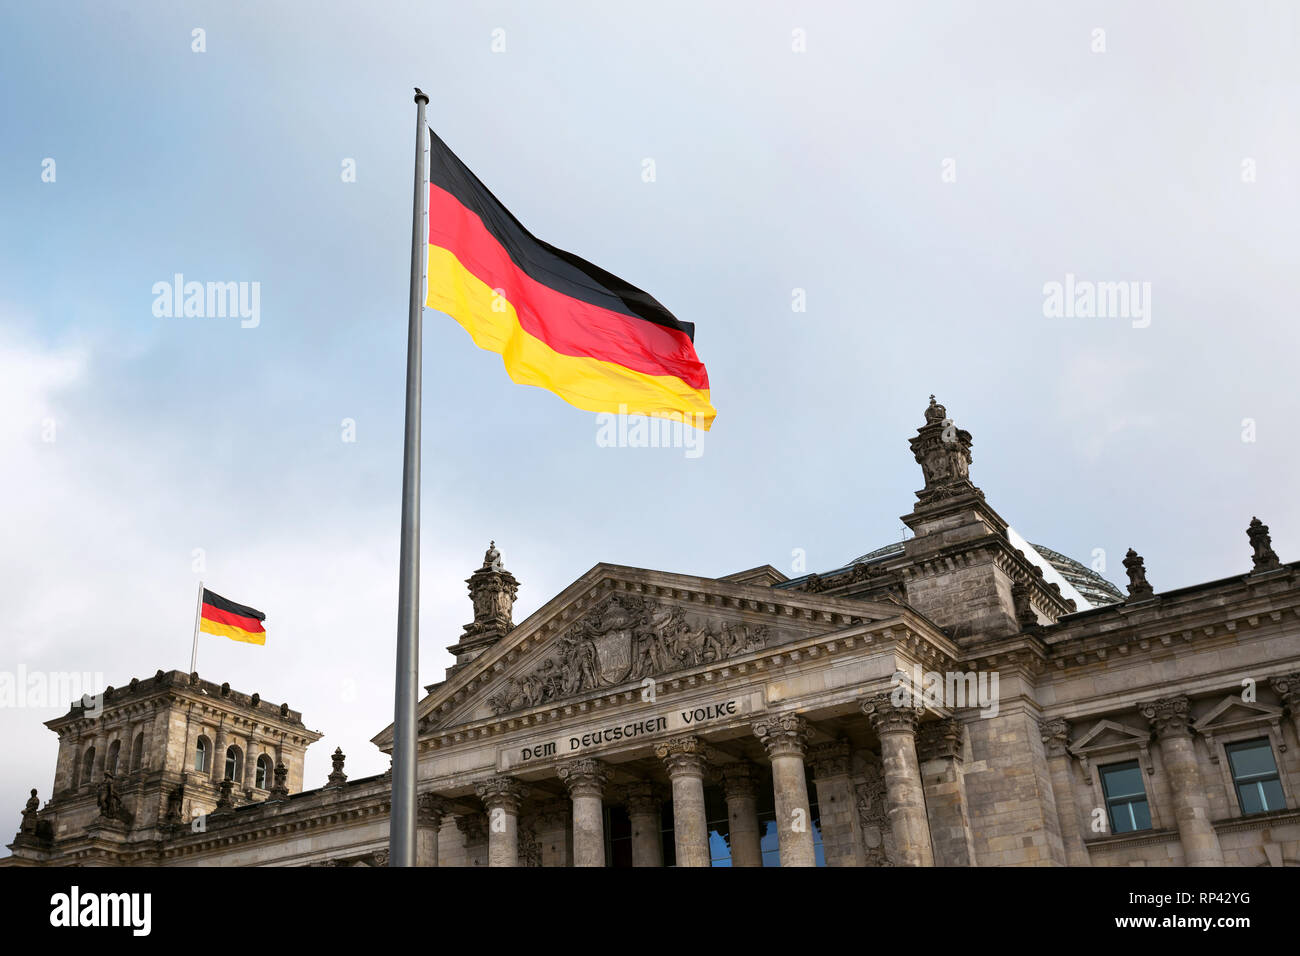 10.12.2018, Berlin, Berlin, Germany - National flag of the Federal Republic of Germany in front of the Reichstag building. 0MC181210D001CAROEX.JPG [MO Stock Photo